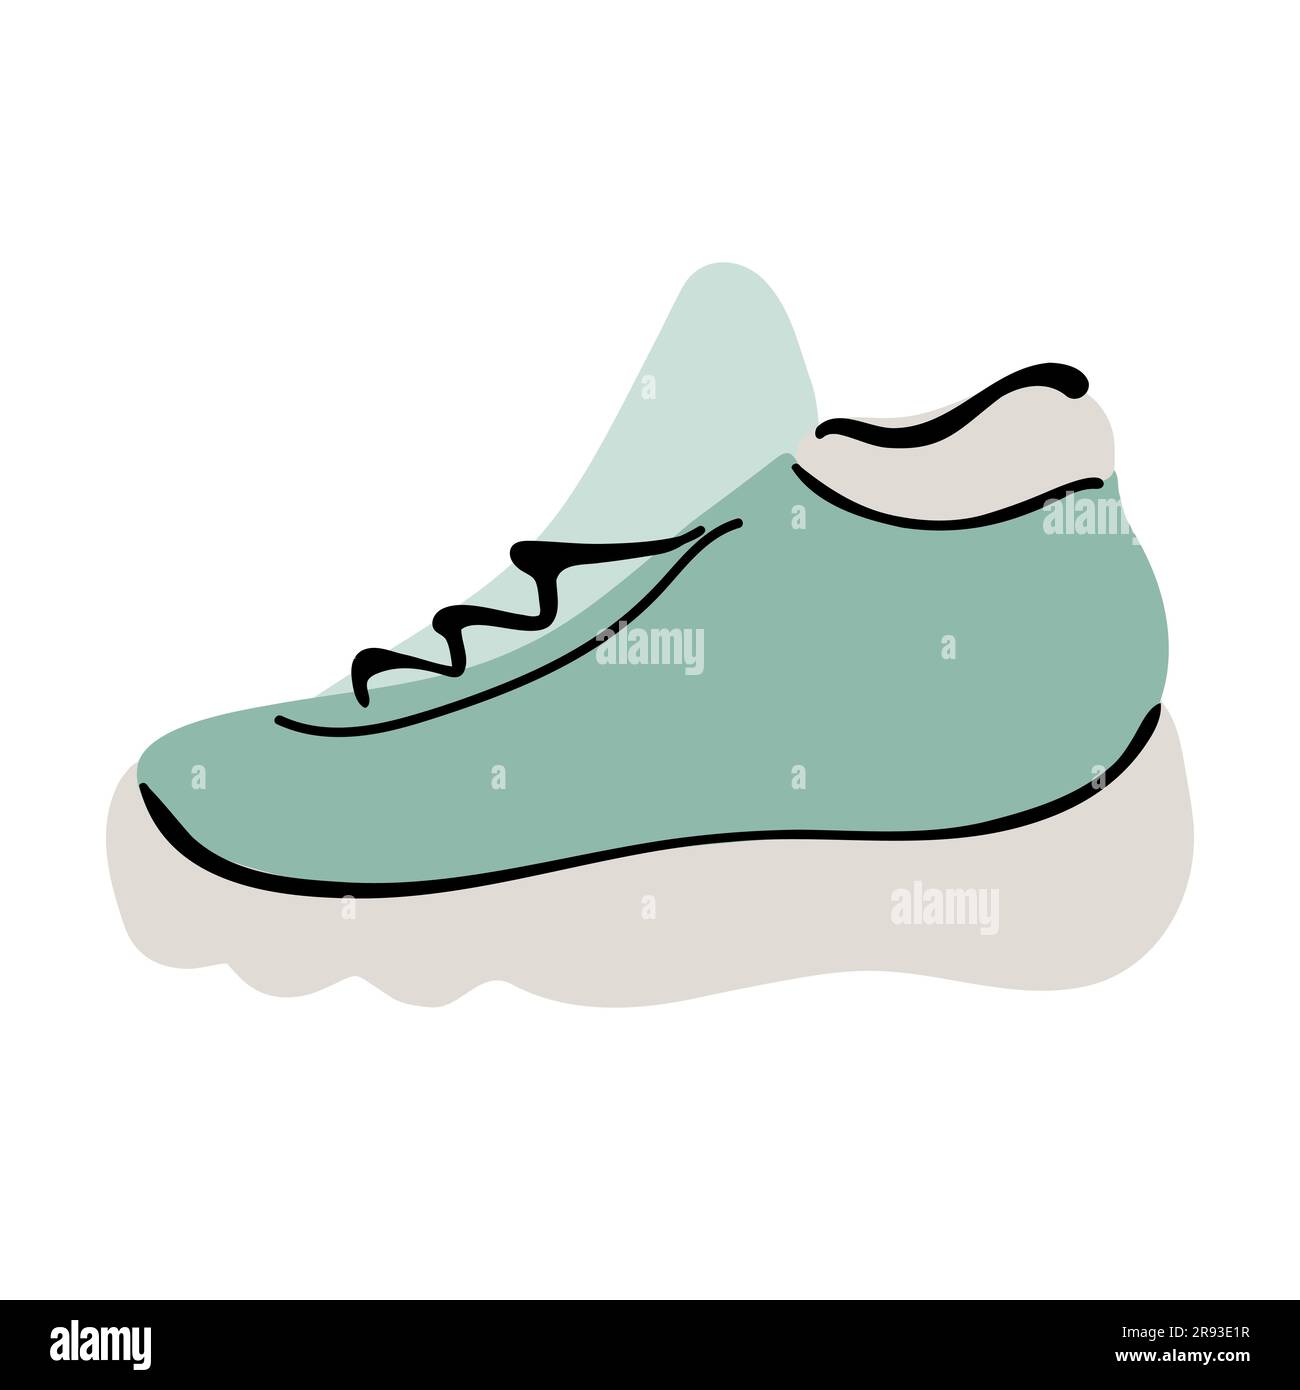 illustrating sneakers was wayy more fun than I expected lool , im tryna  think of a name for them 😭 | Sneakers illustration, Sneaker art, Small  canvas art